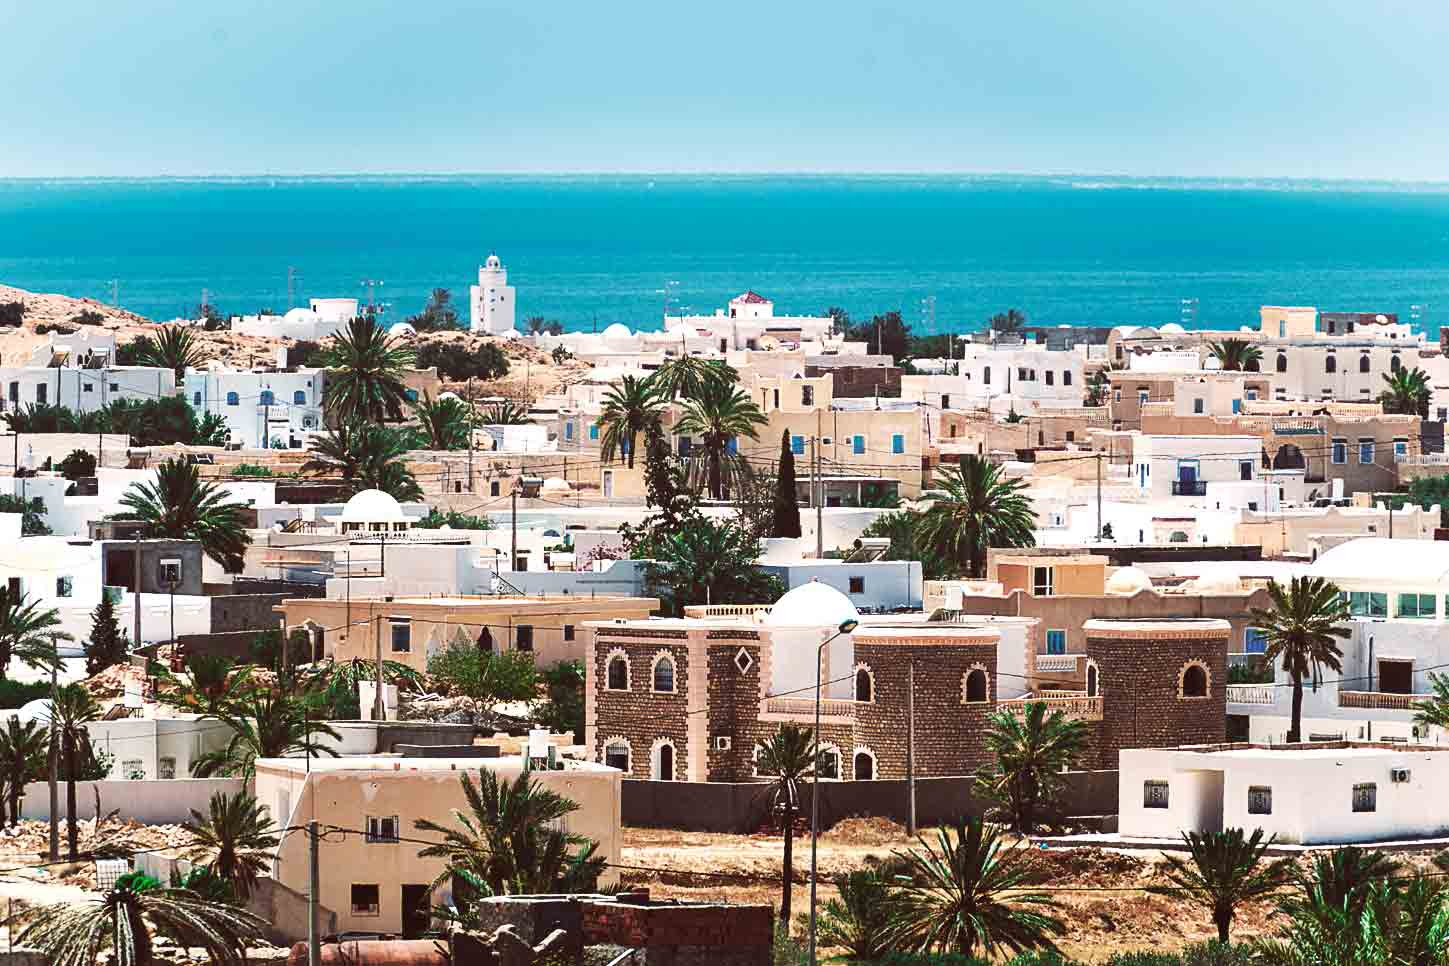 Djerba island is one of the best places to see in Tunisia